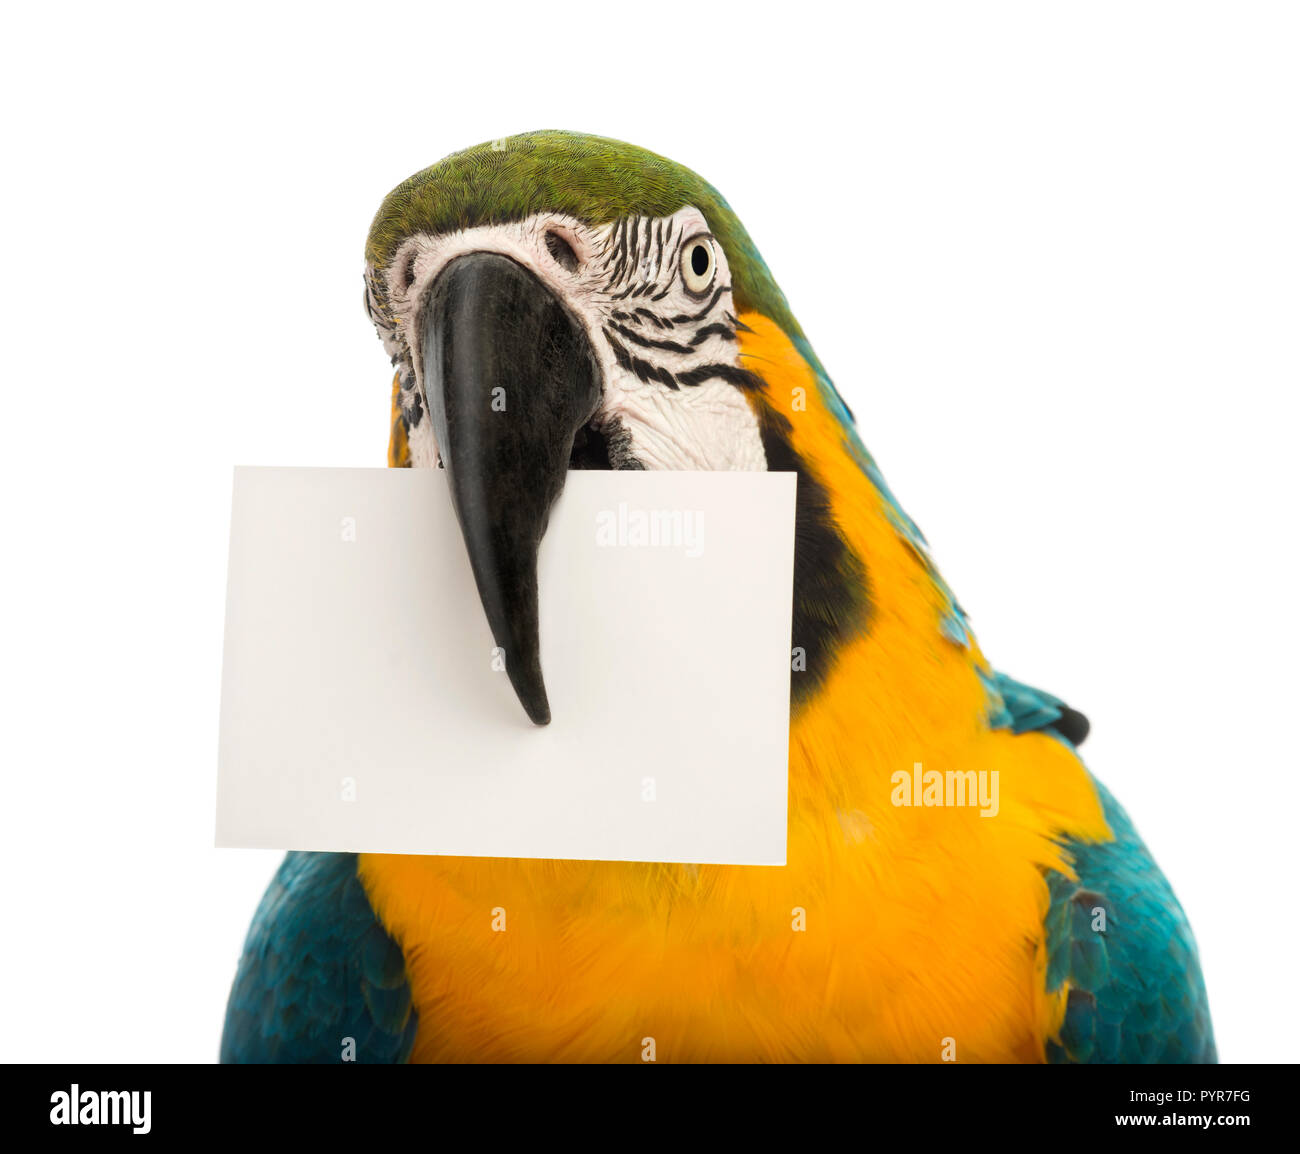 Close-up of a Blue-and-yellow Macaw, Ara ararauna, 30 years old, holding a white card in its beak in front of white background Stock Photo